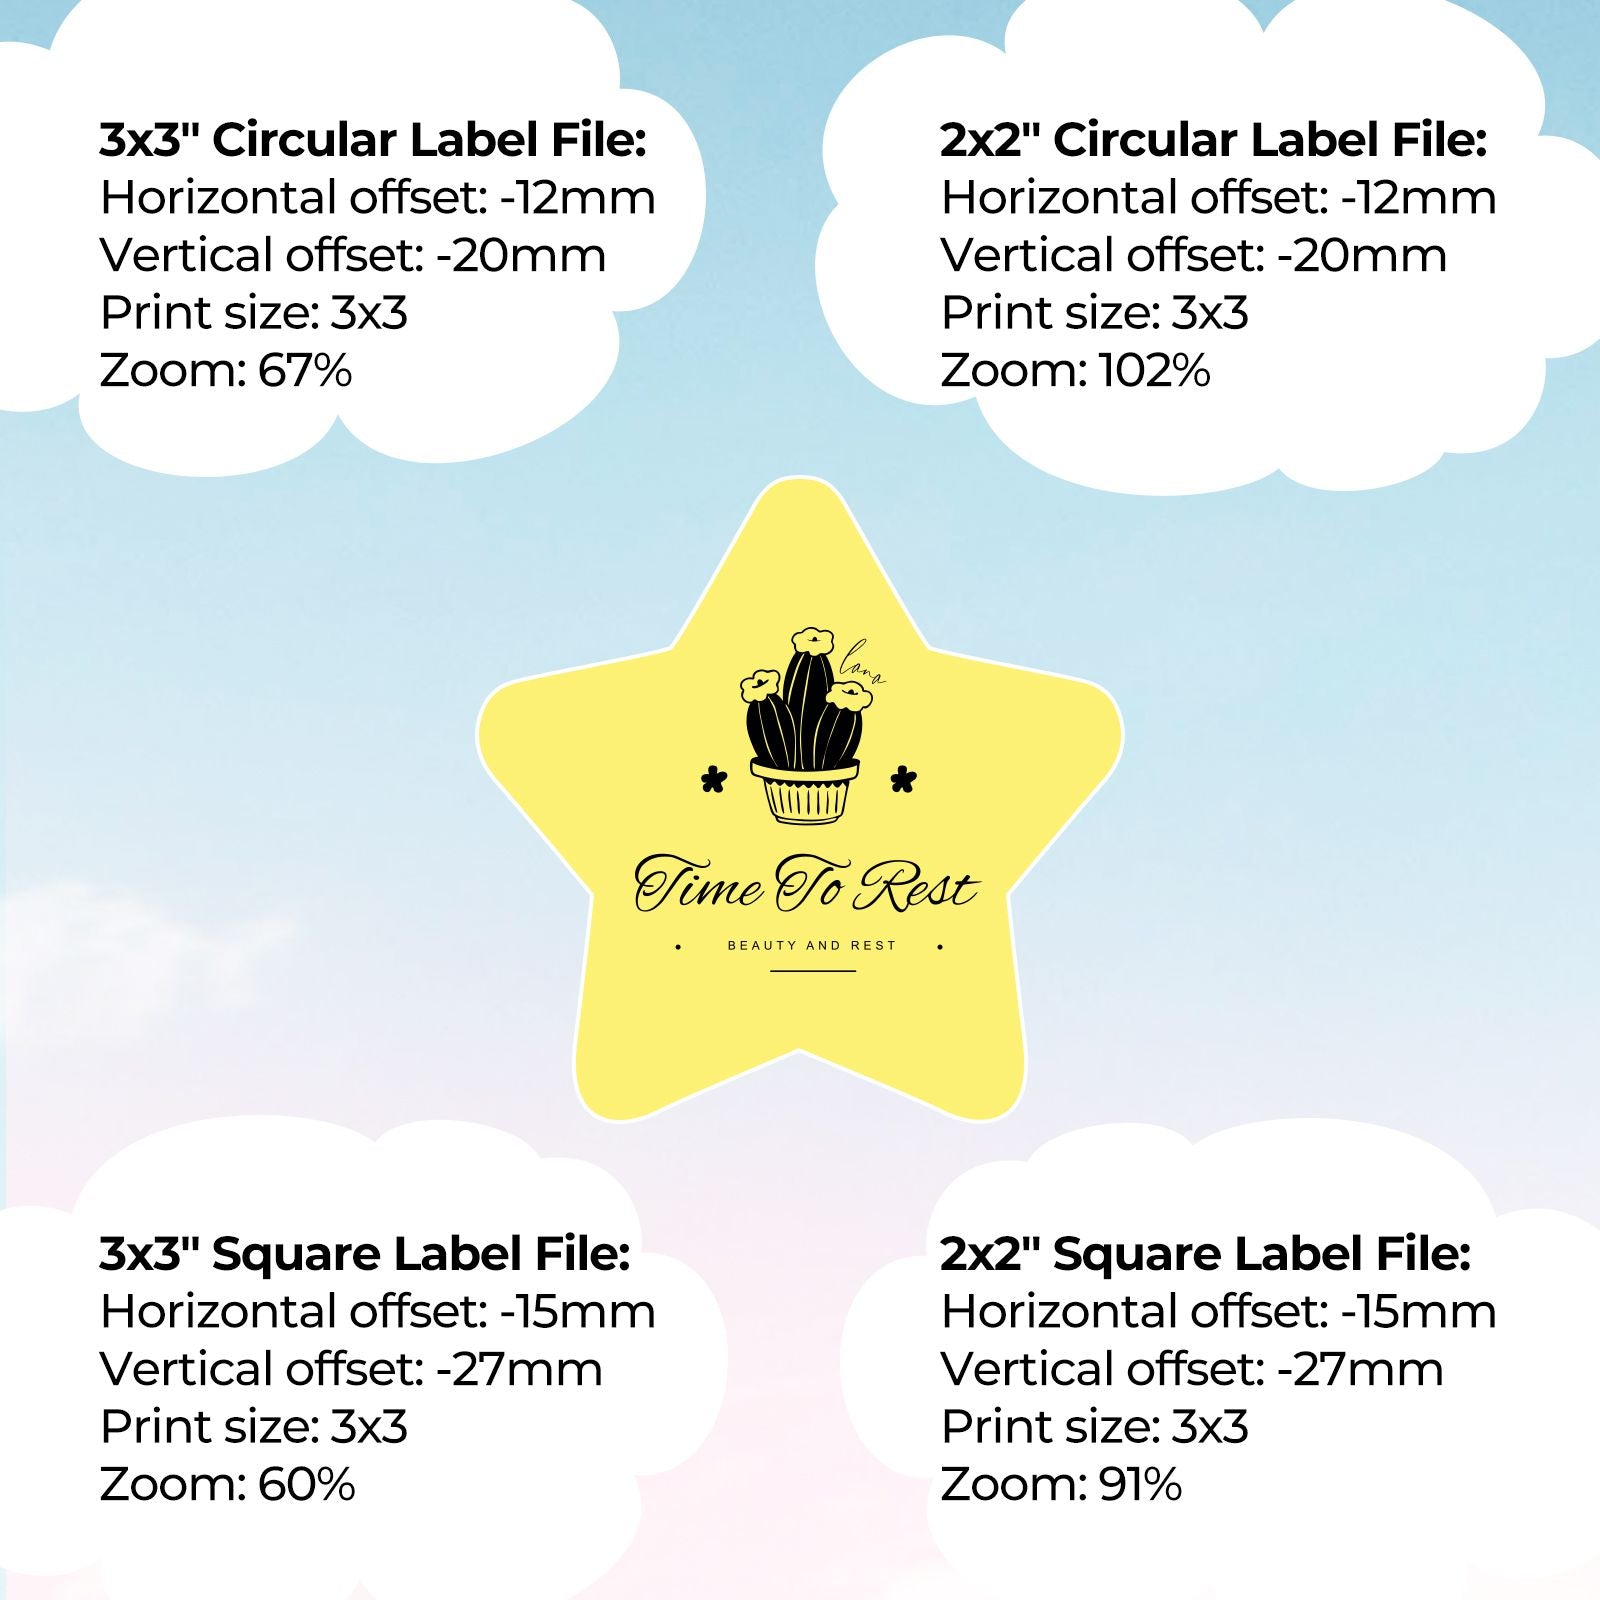 MUNBYN labels, MUNBYN thermal labels, MUNBYN sticker labels, sticker labels, star stickers, Gold, yellow, Pentagonal stickers, Pentagonal labels, yellow stars, blank label, roll labels, diy stickers, etsy labels, print stickers at home